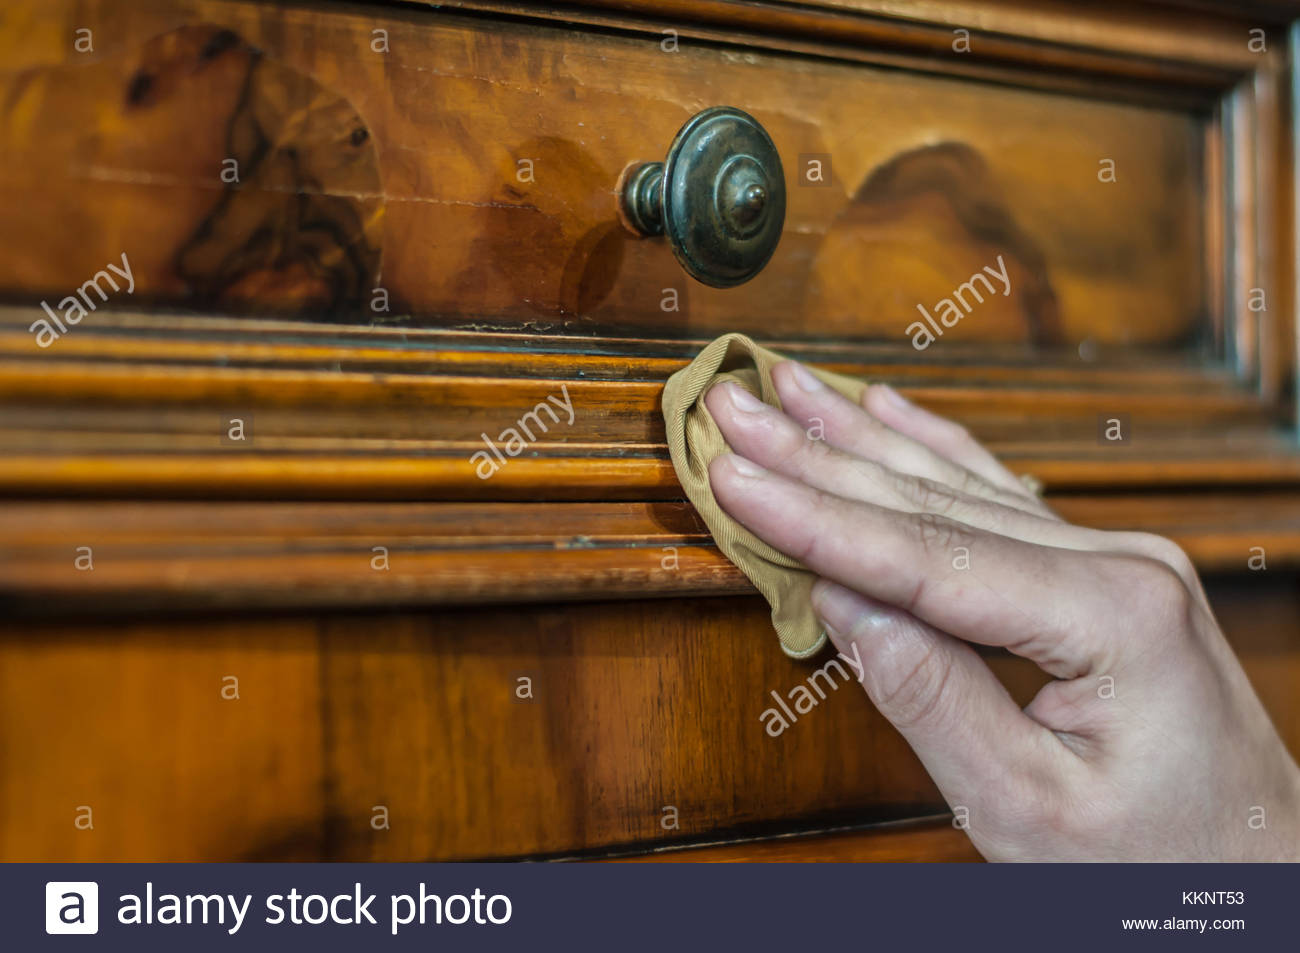 Antique Furniture Cleaning Stockfotos Antique Furniture Cleaning